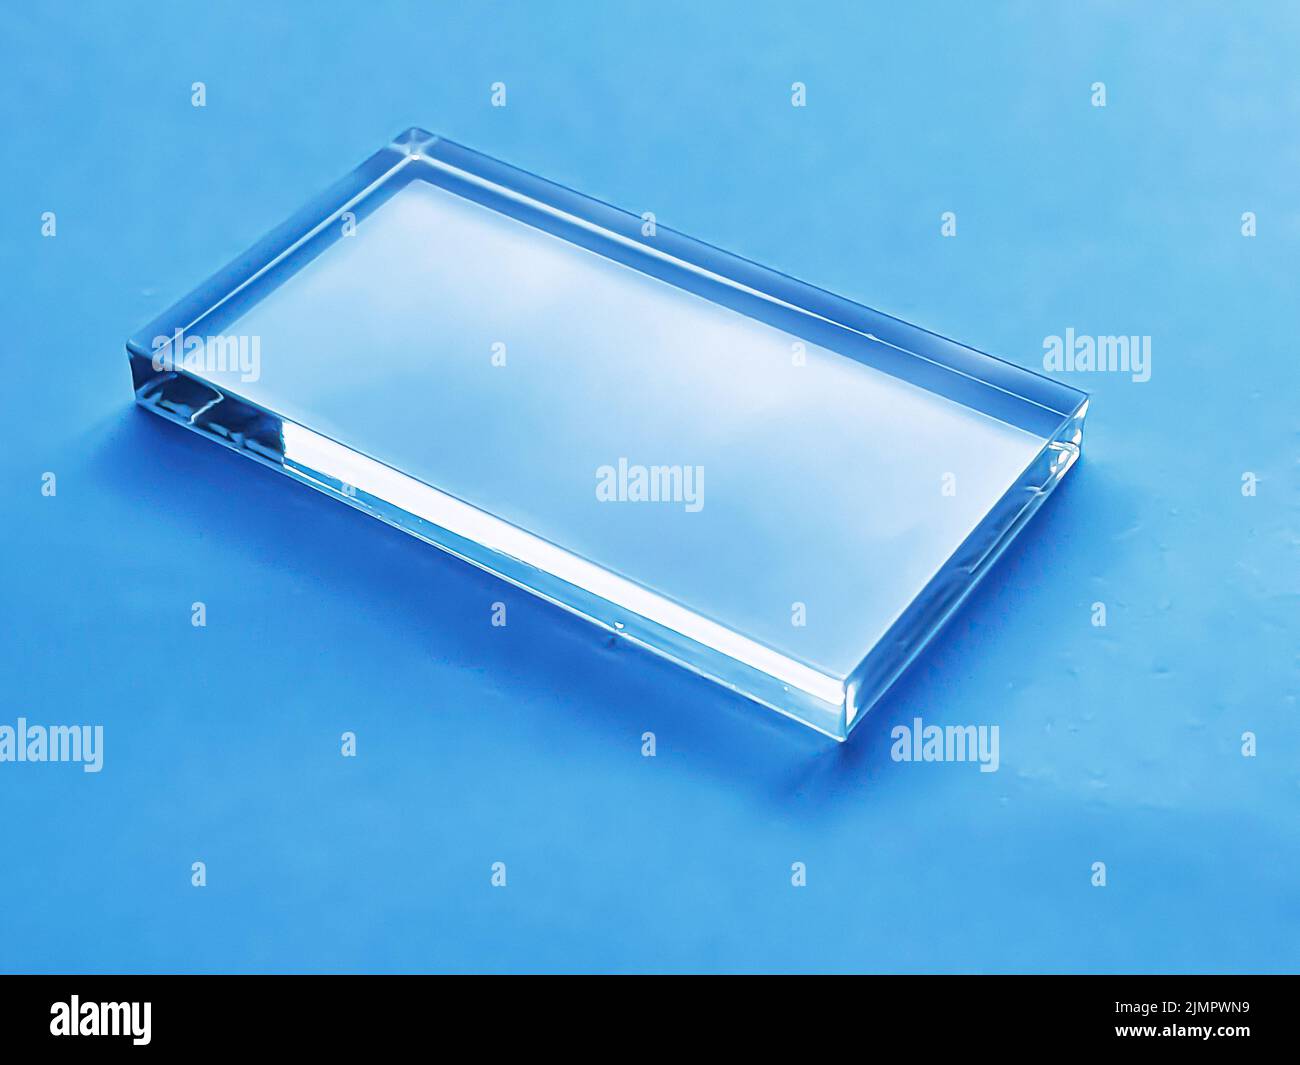 Glass device on blue background, future technology and abstract screen mockup design Stock Photo